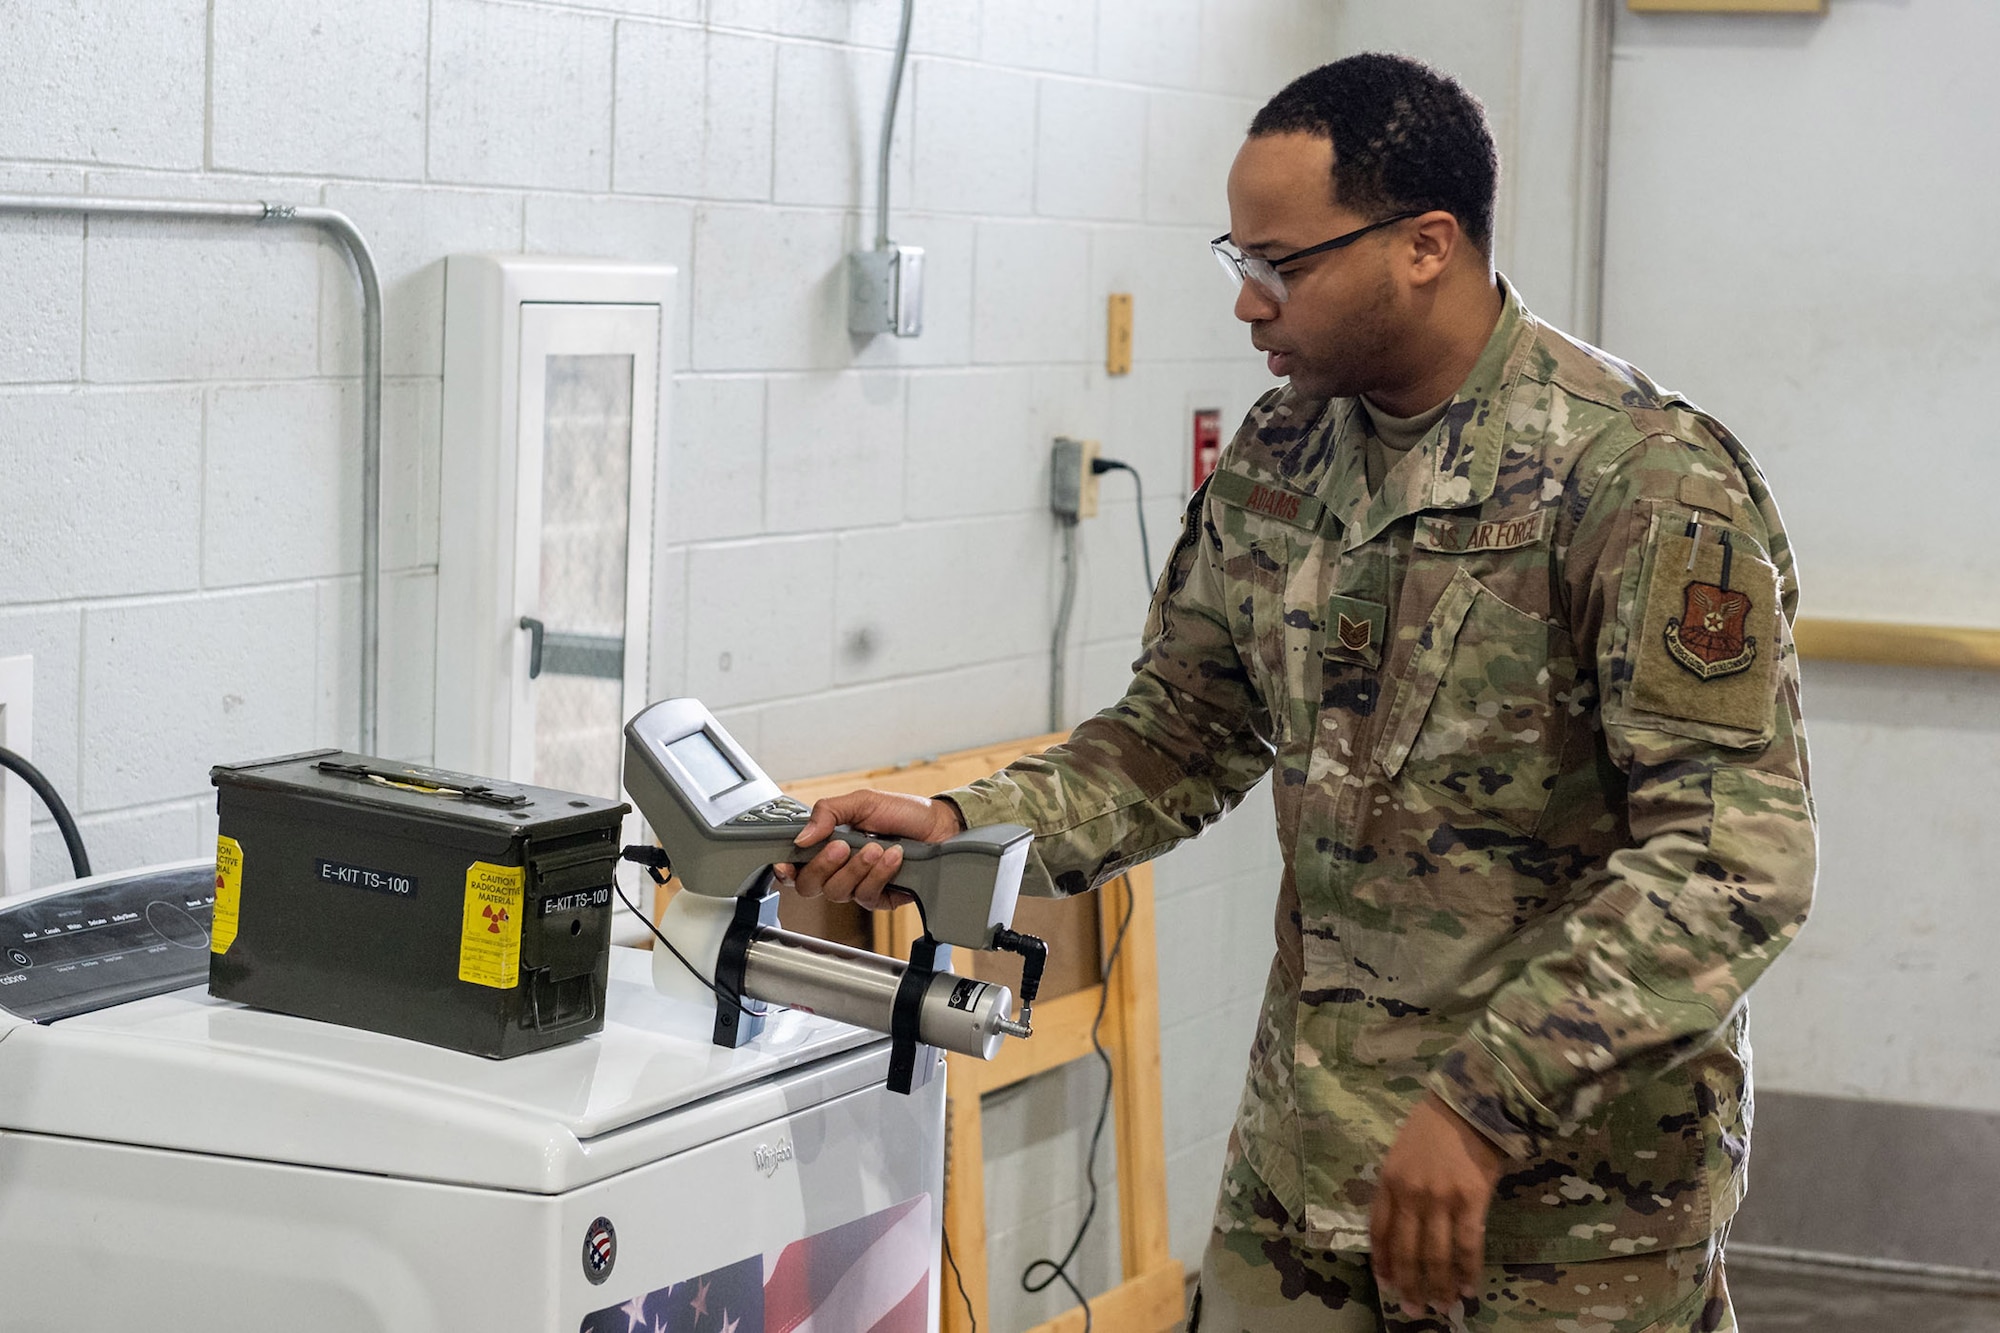 Tech. Sgt. Darryl Adams, 341st Bioenvironmental Engineering Squadron NCO in-charge, scans an ammo can for radiation during a joint-training event March 8, 2022, at the emergency management warehouse on Malmstrom Air Force Base, Mont. Adams is using a SAM-940 radiation device, which quantifies and identifies radioactive isotopes. Outside agencies, such as the FBI, rely on bioenvironmental personnel to detect dangerous chemicals on and around the installation during emergency situations. (U.S. Air Force photo by Airman 1st Class Elijah Van Zandt)